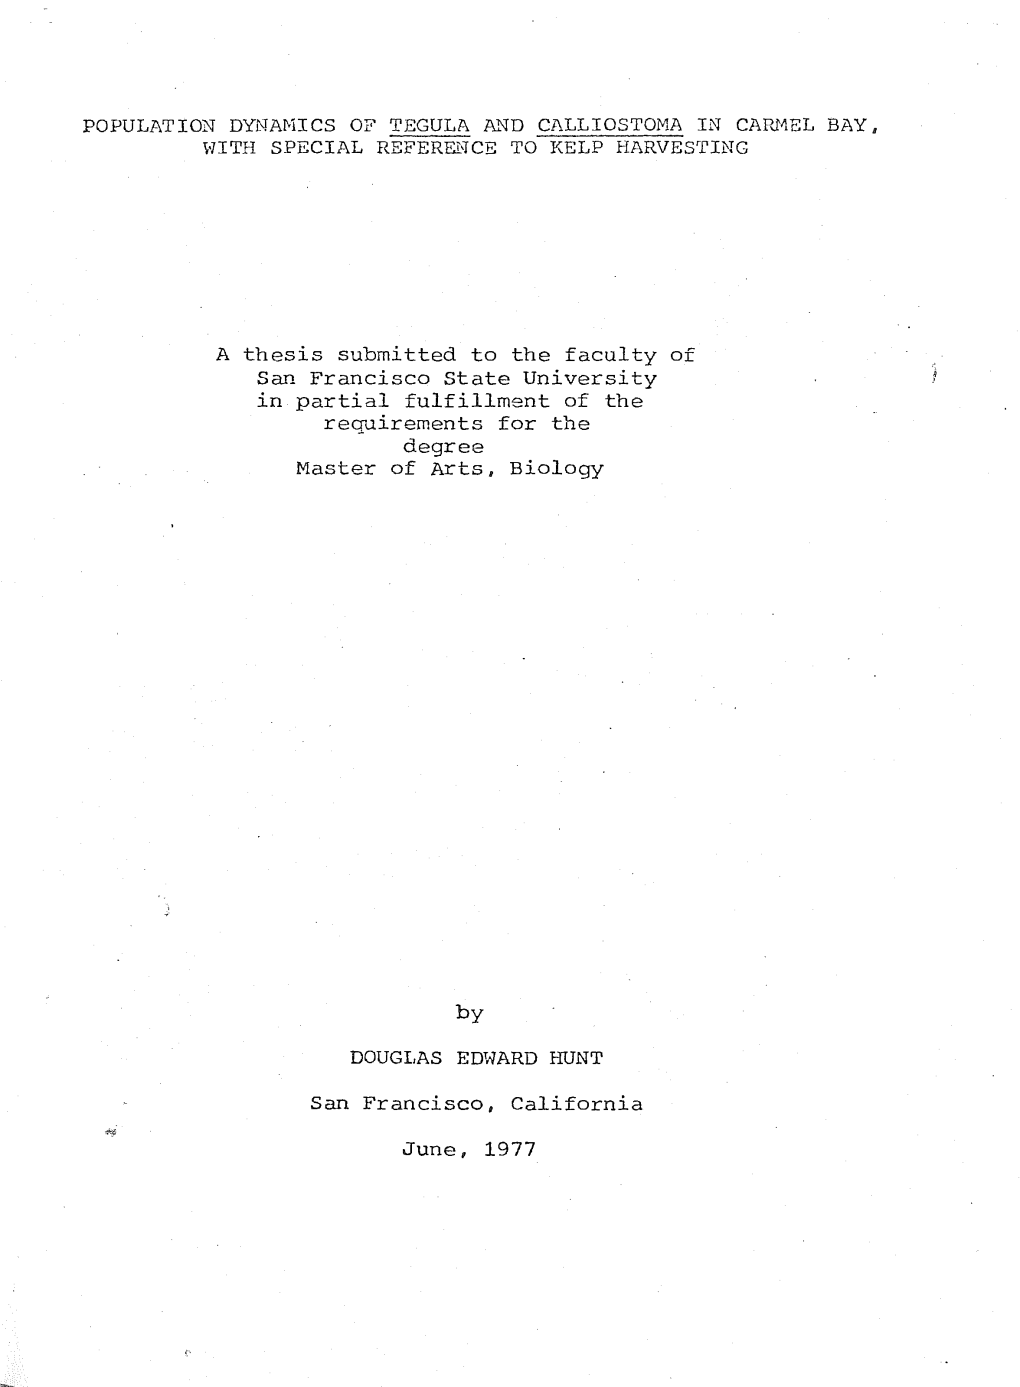 A Thesis Submitted to the Faculty of San Francisco State University in Partial Fulfillment of the Req~Irements for the Degree Master of Arts, Biology